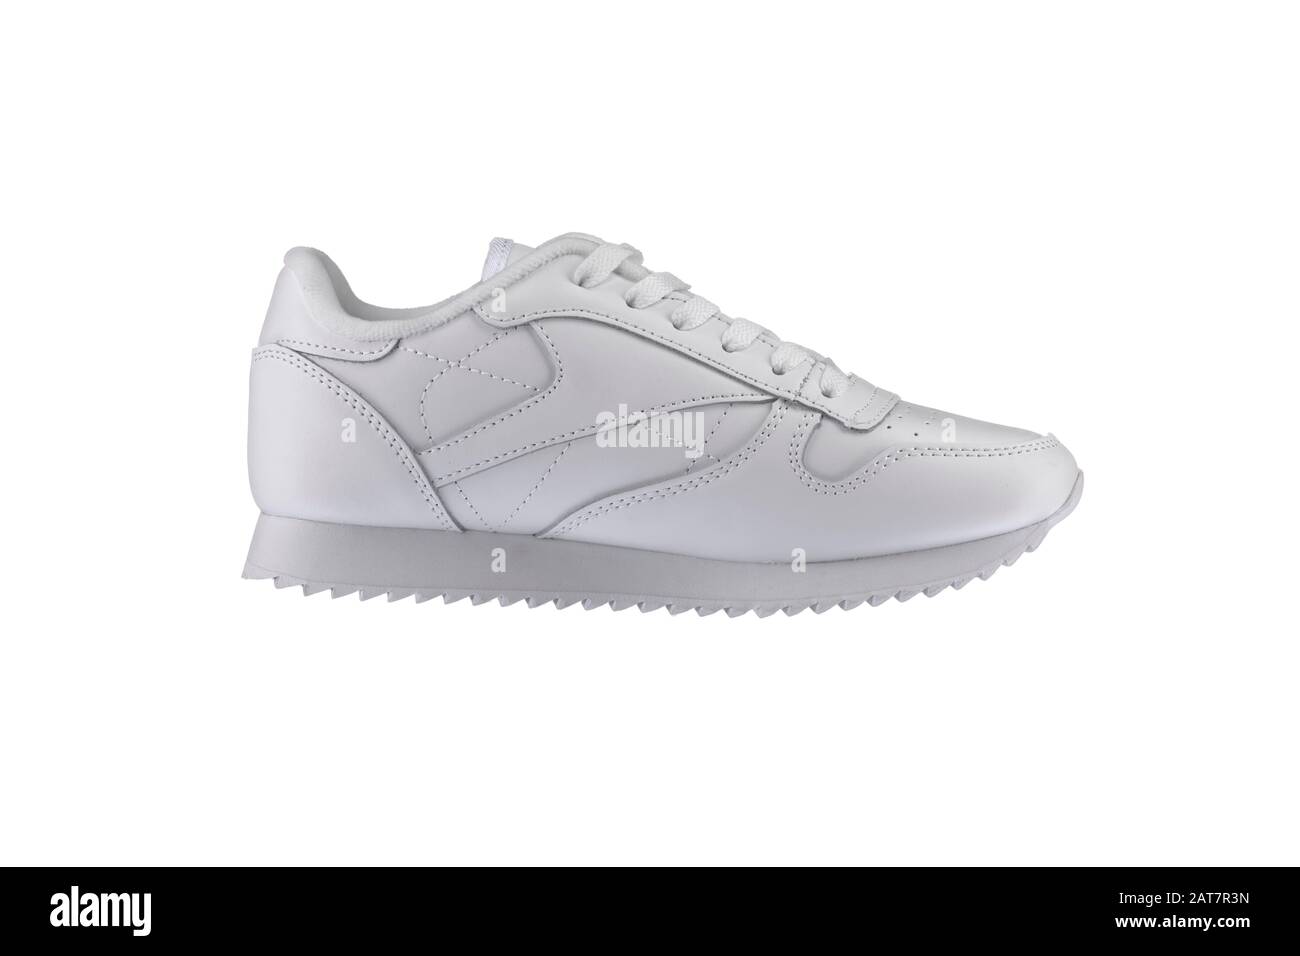 Sport shoes. White sneaker on a white background. Stock Photo